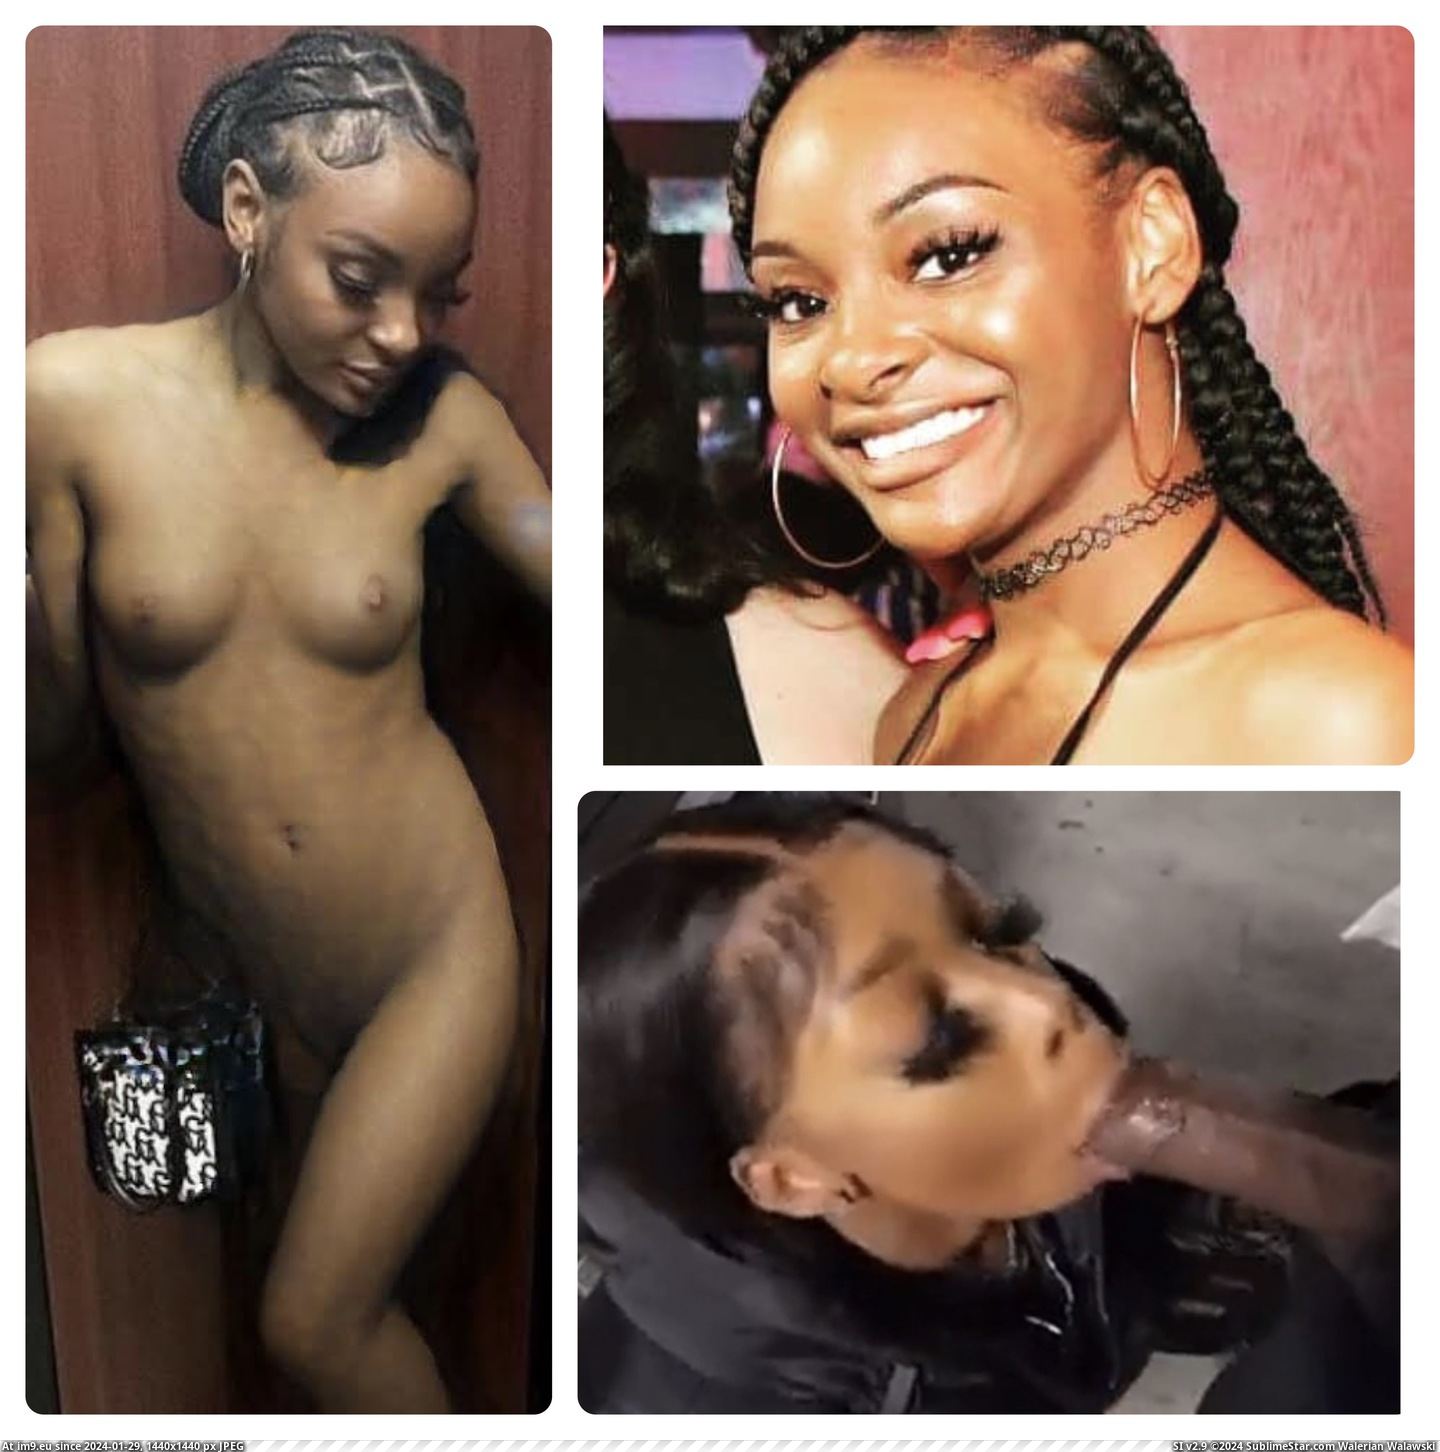 #White #Ebony #Owned #Collages #Aaliyah #Dallas Aaliyah White Ebony Collages - 044 Pic. (Image of album Aaliyah White, Dallas, TX Sex Slave needing to be grabbed and owned))